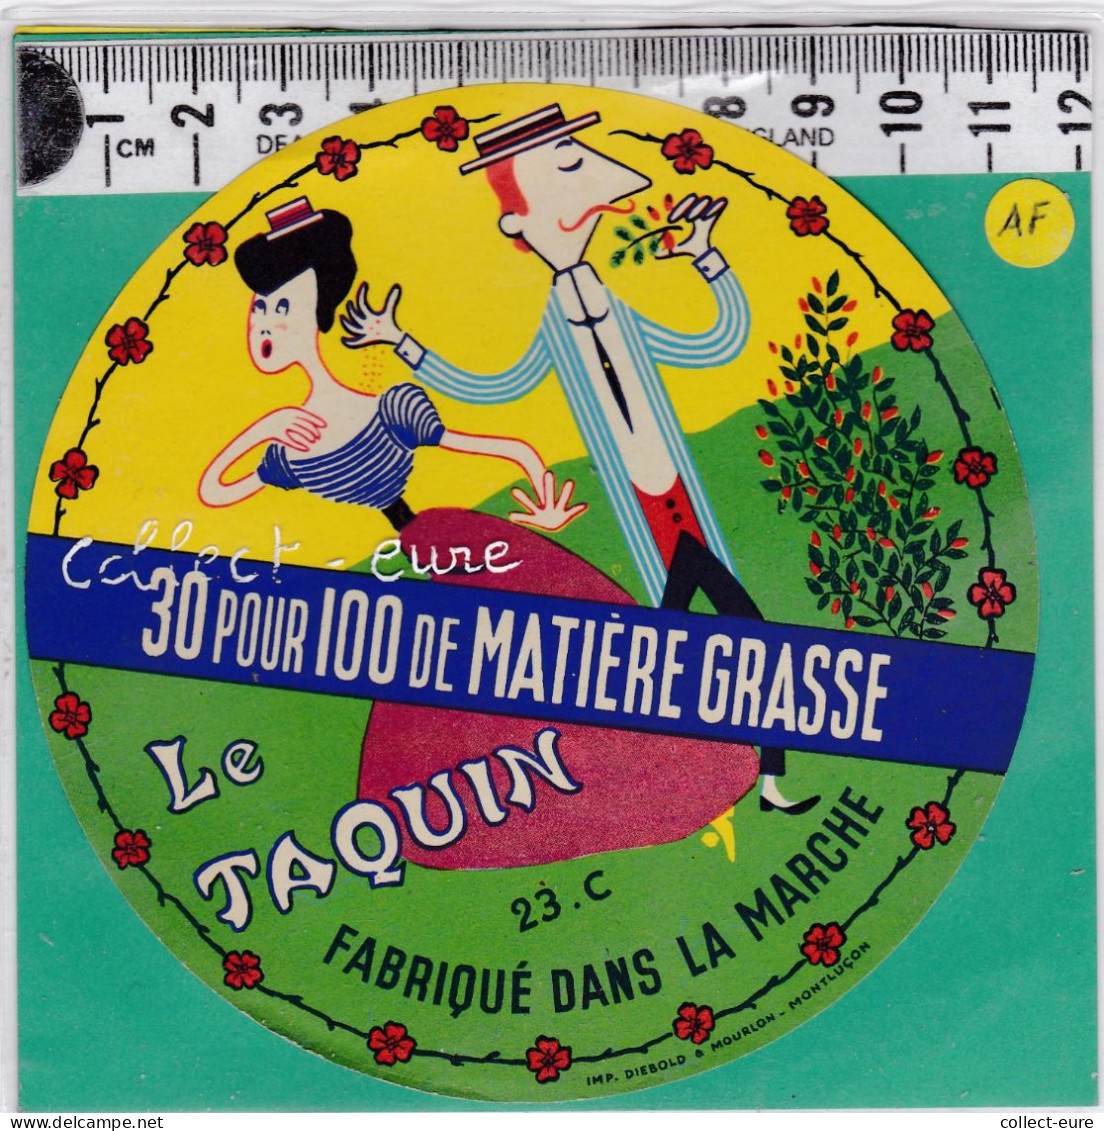 C1349 FROMAGE LE TAQUIN BOURGANEUF CREUSE - Formaggio